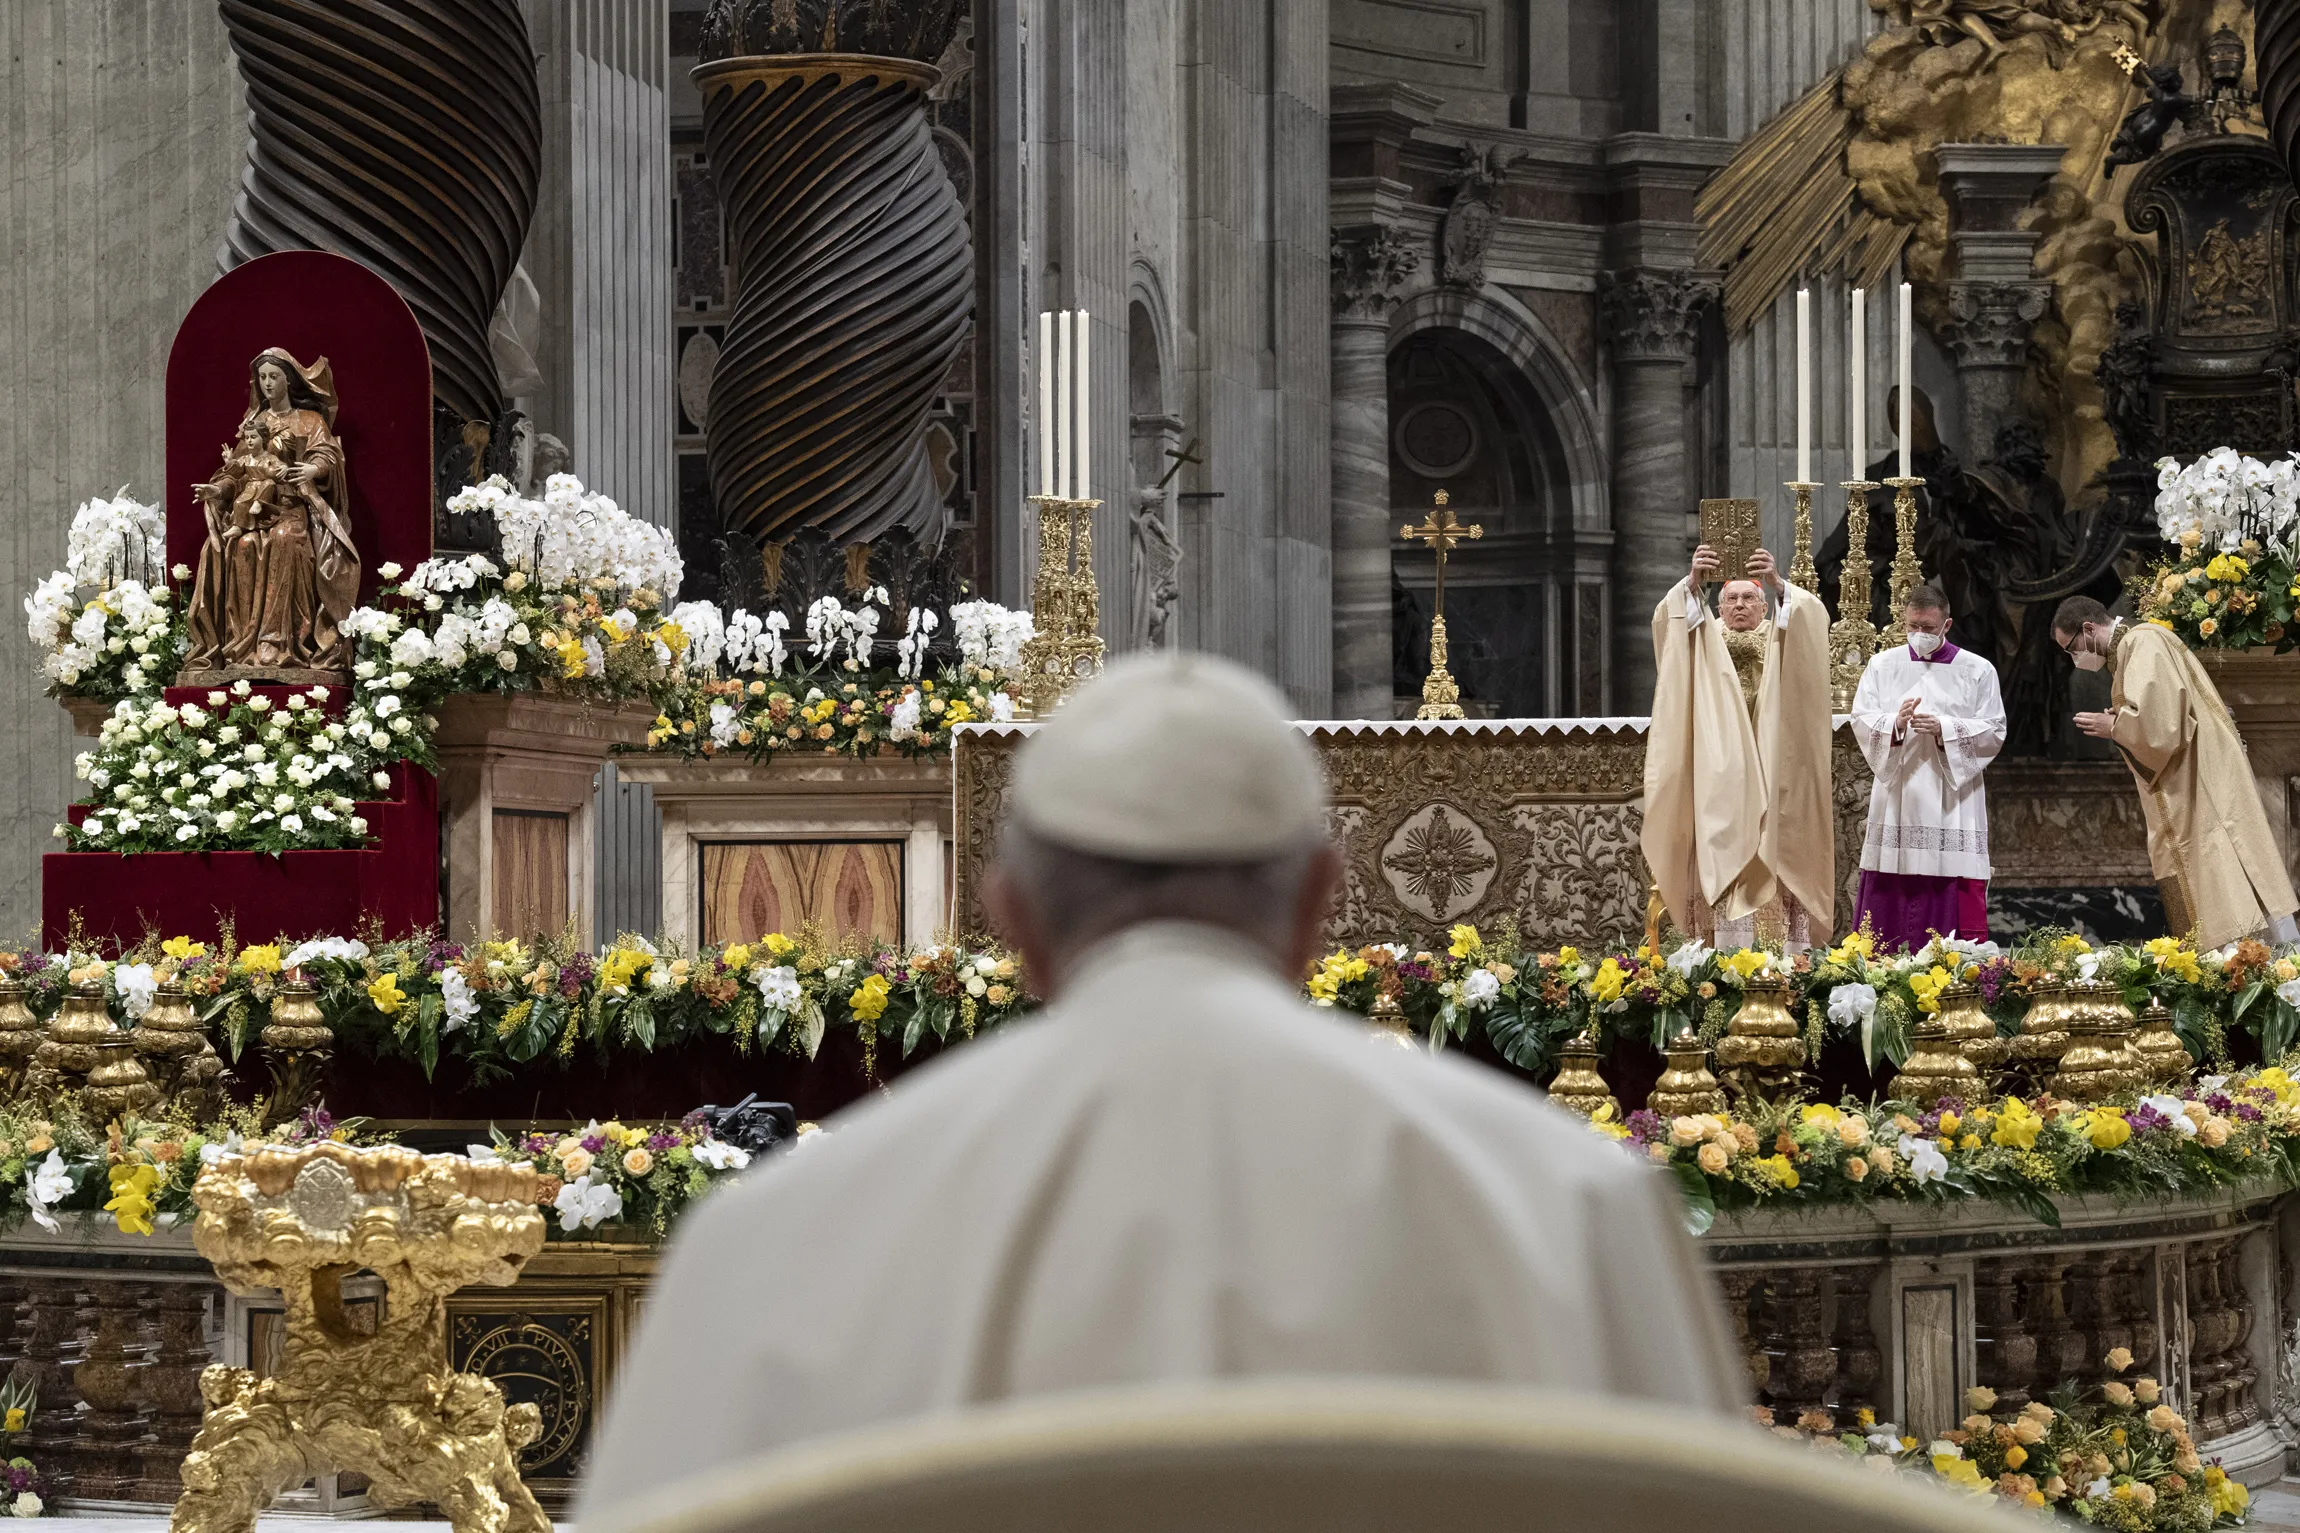 Pope Francis at the Easter Vigil Mass in St. Peter's Basilica on April 16, 2022.?w=200&h=150